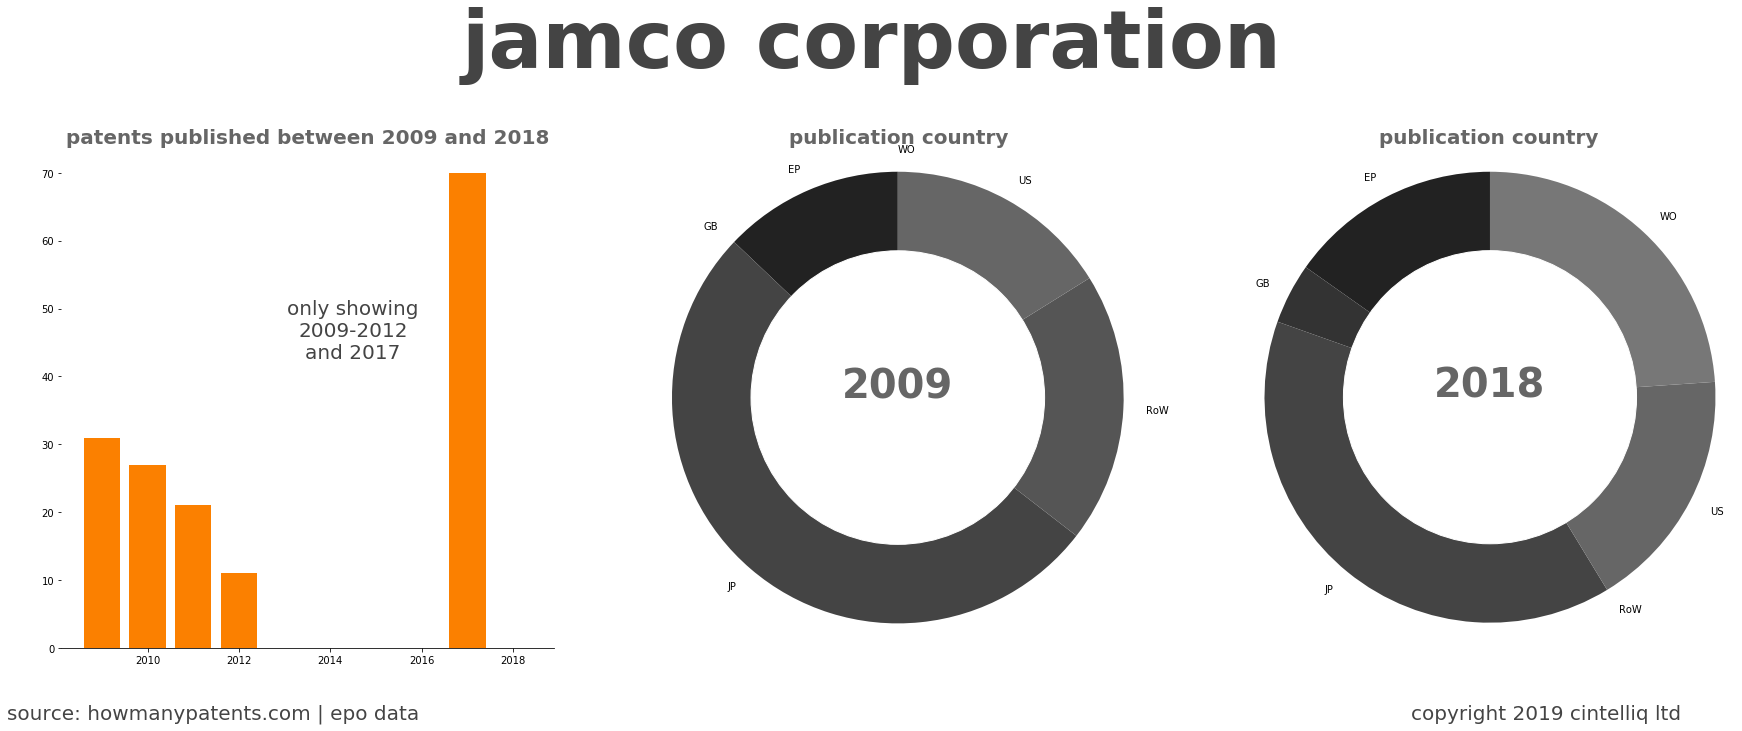 summary of patents for Jamco Corporation